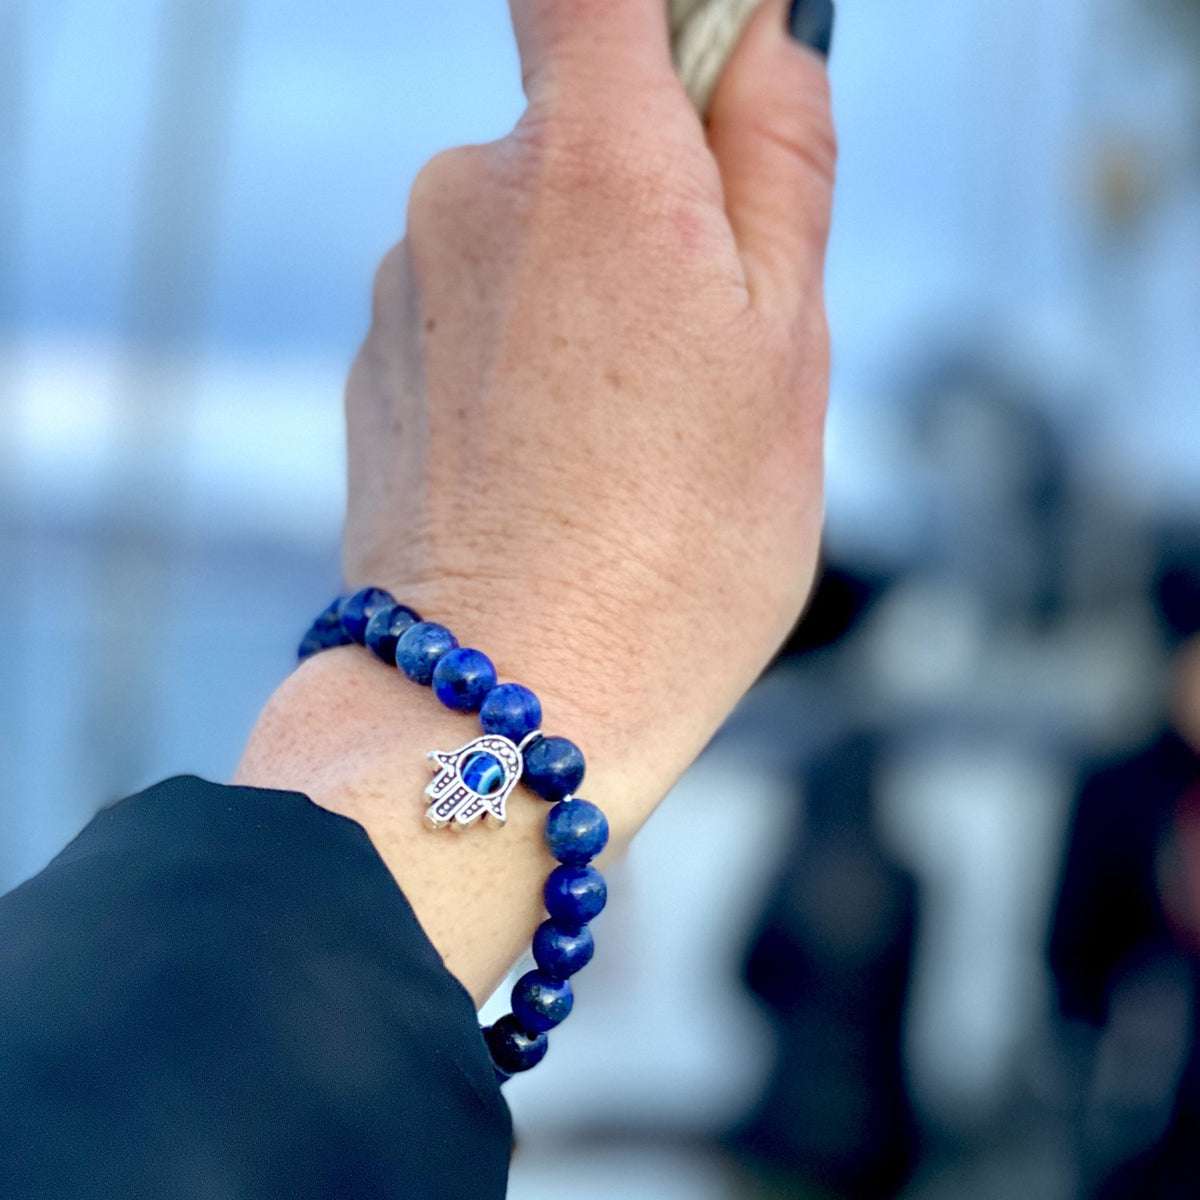 Lapis Lazuli Bracelet with Hamsa Hand to Ward off Evil and for Self-awareness